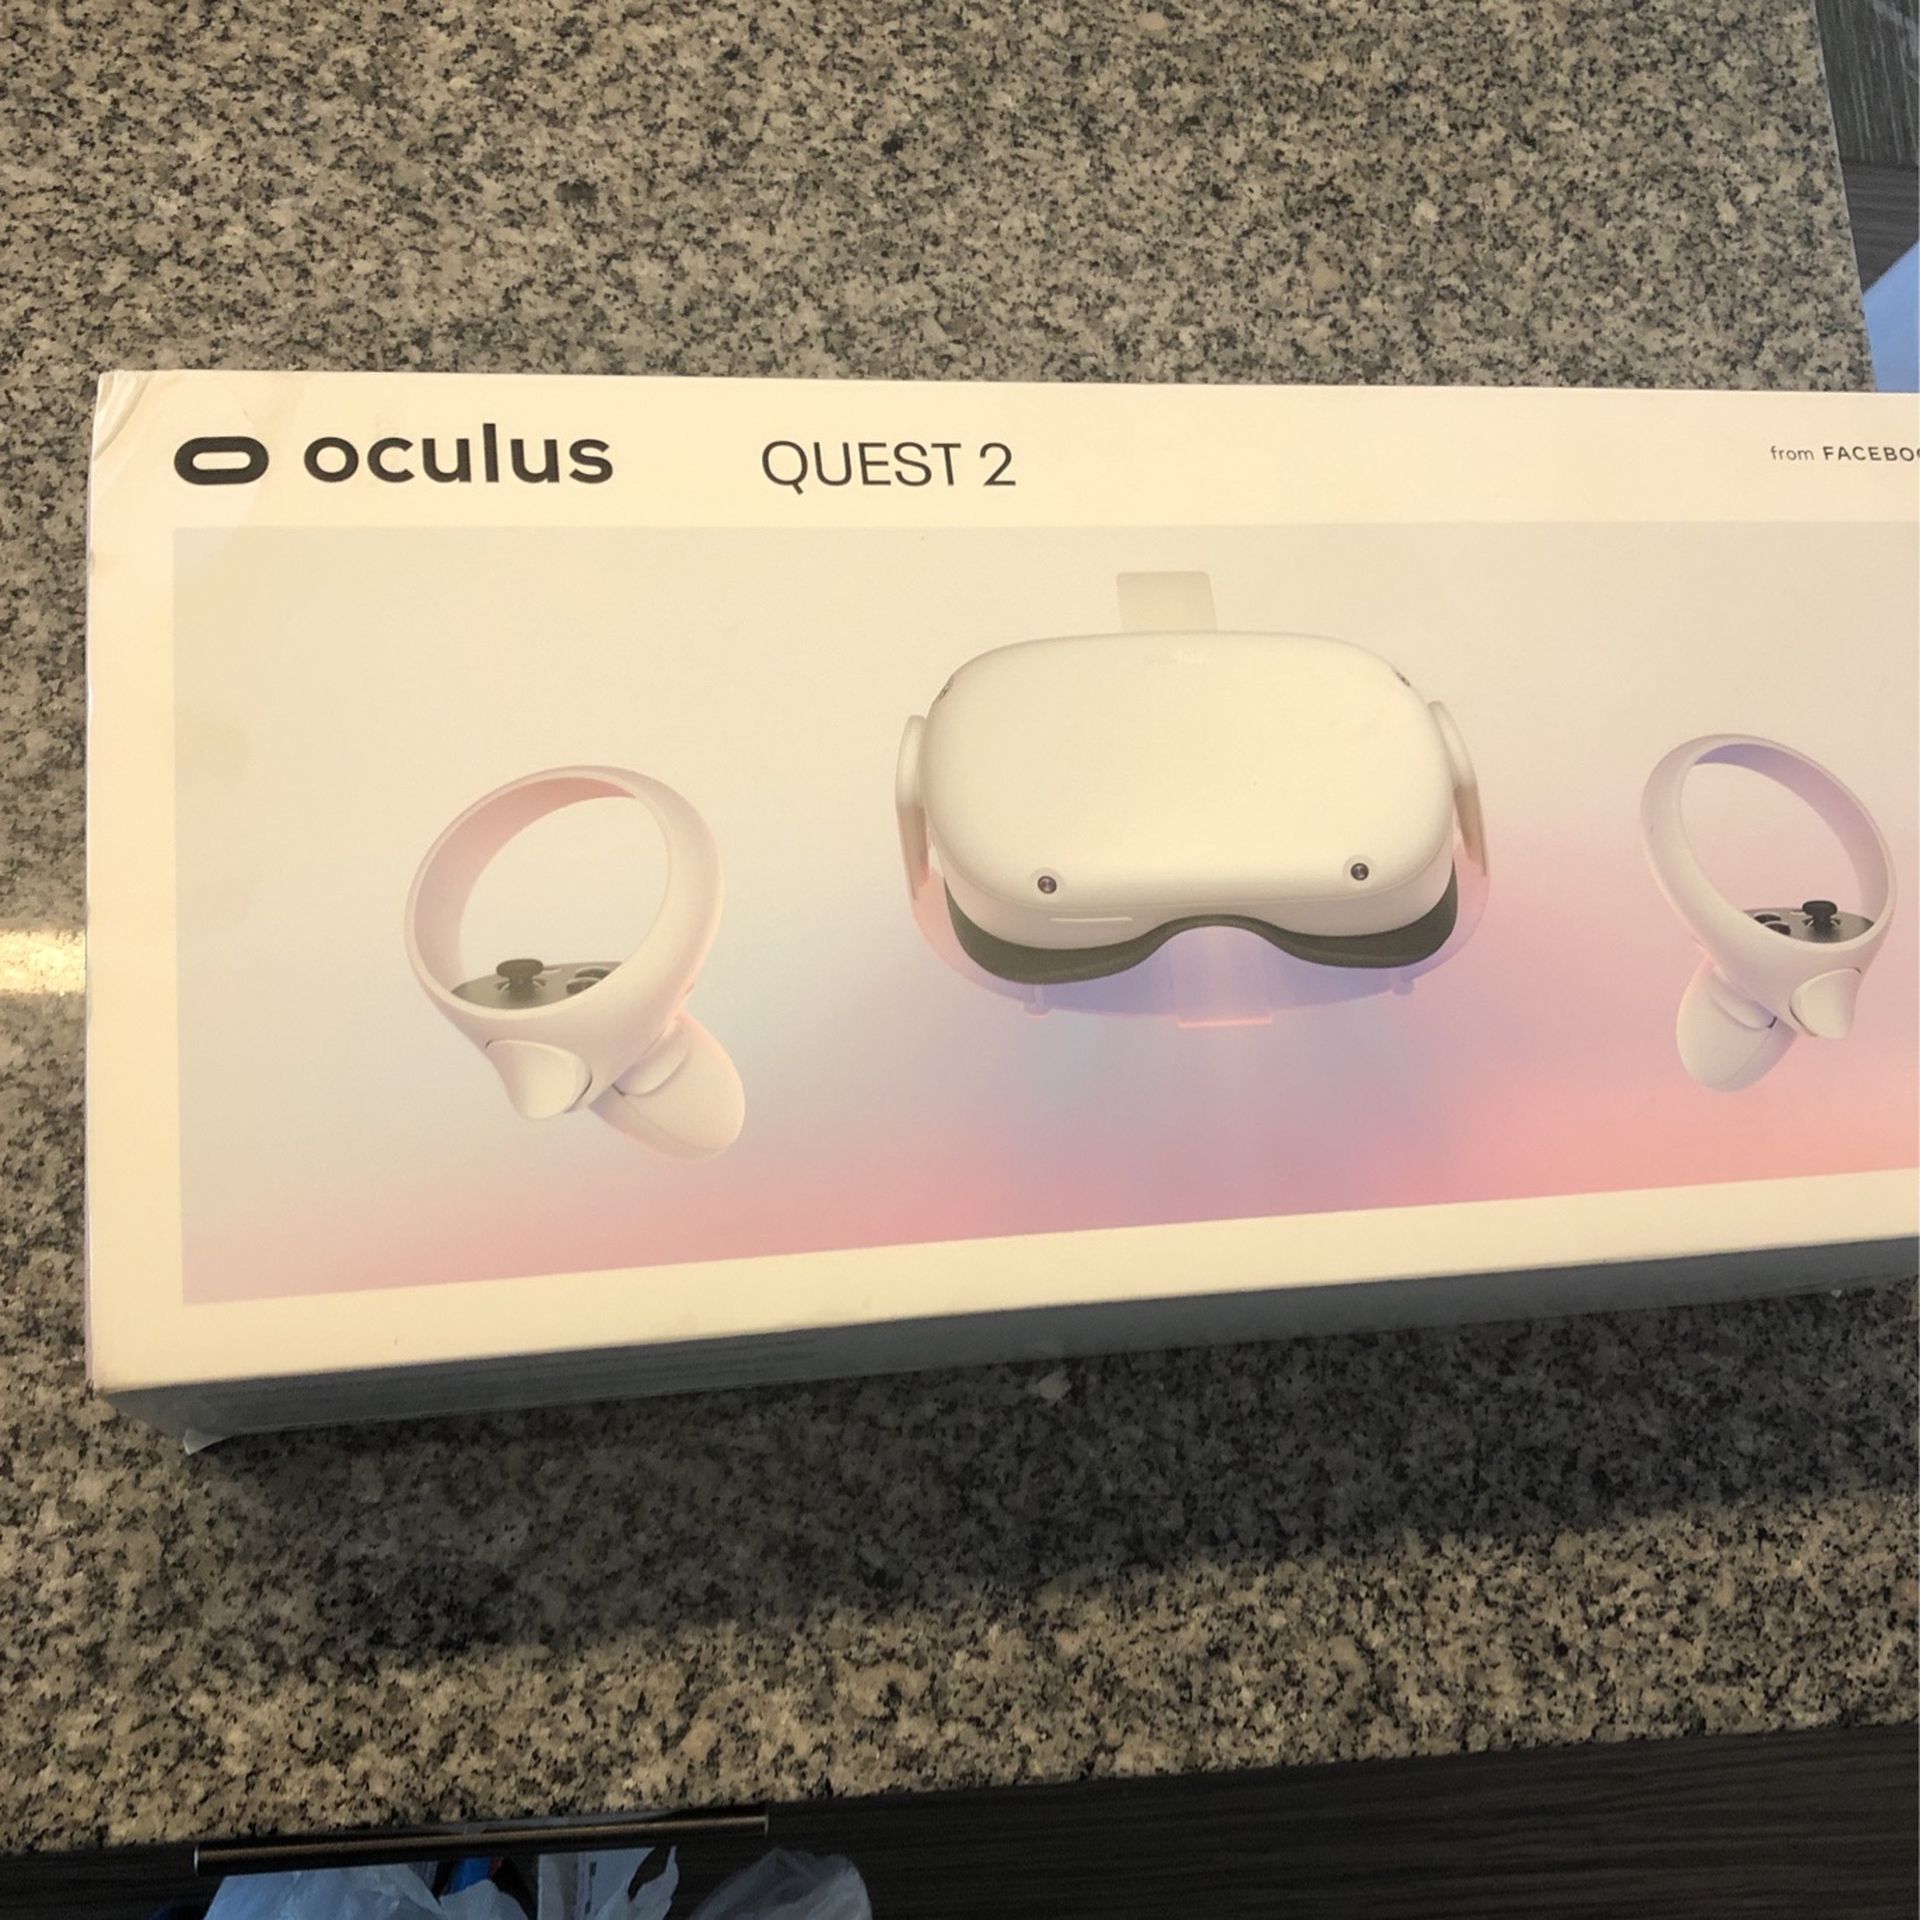 256 GB Oculus Quest 2 Brand New ($225) Great Deal!